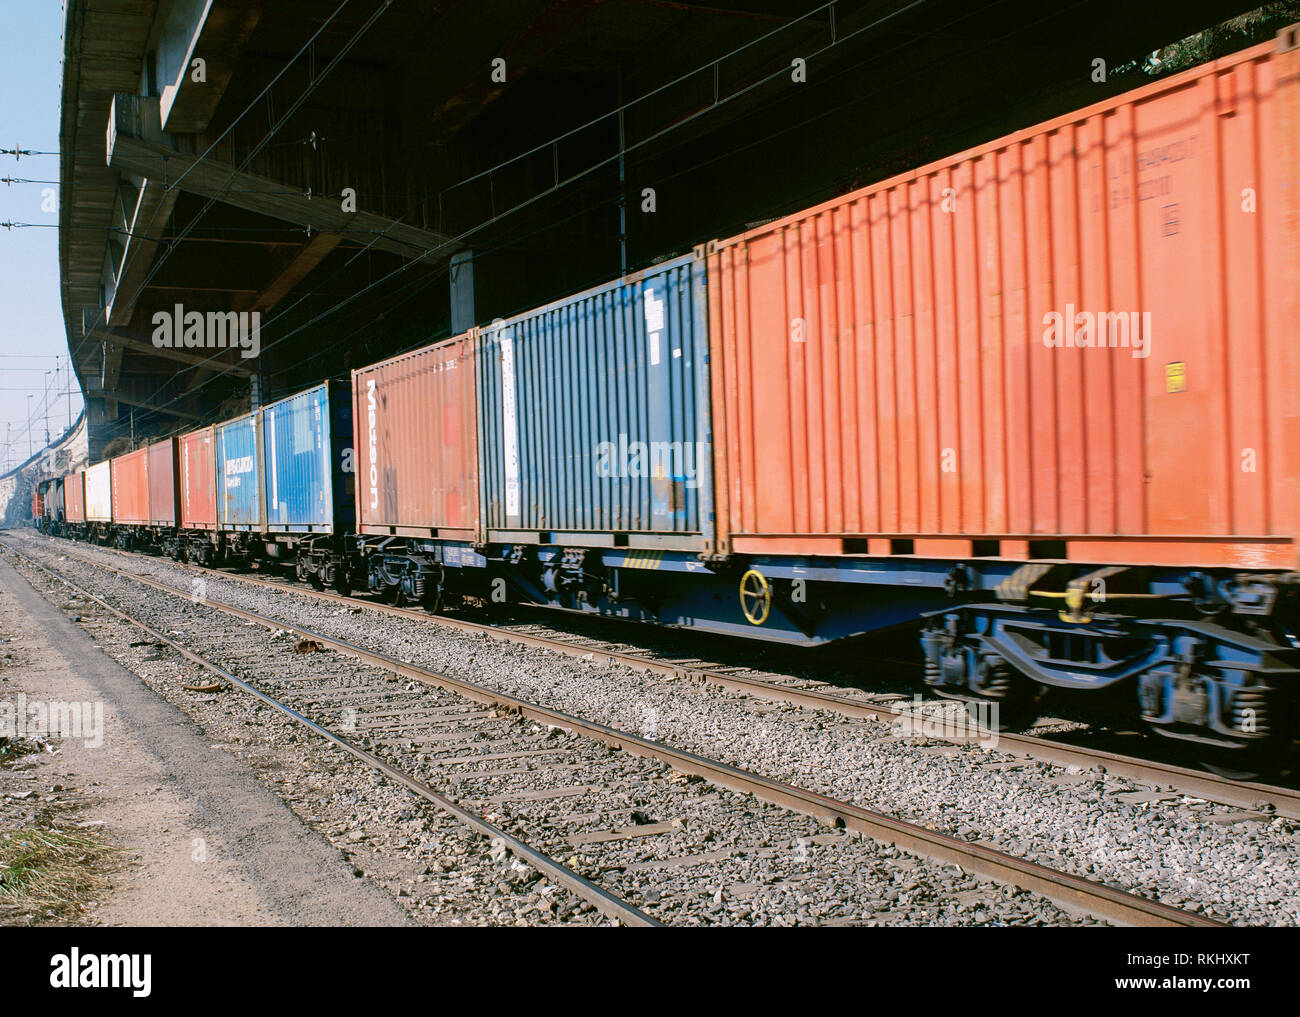 Merchandise train loaded with containers. Barcelona, Catalonia, Spain. Stock Photo